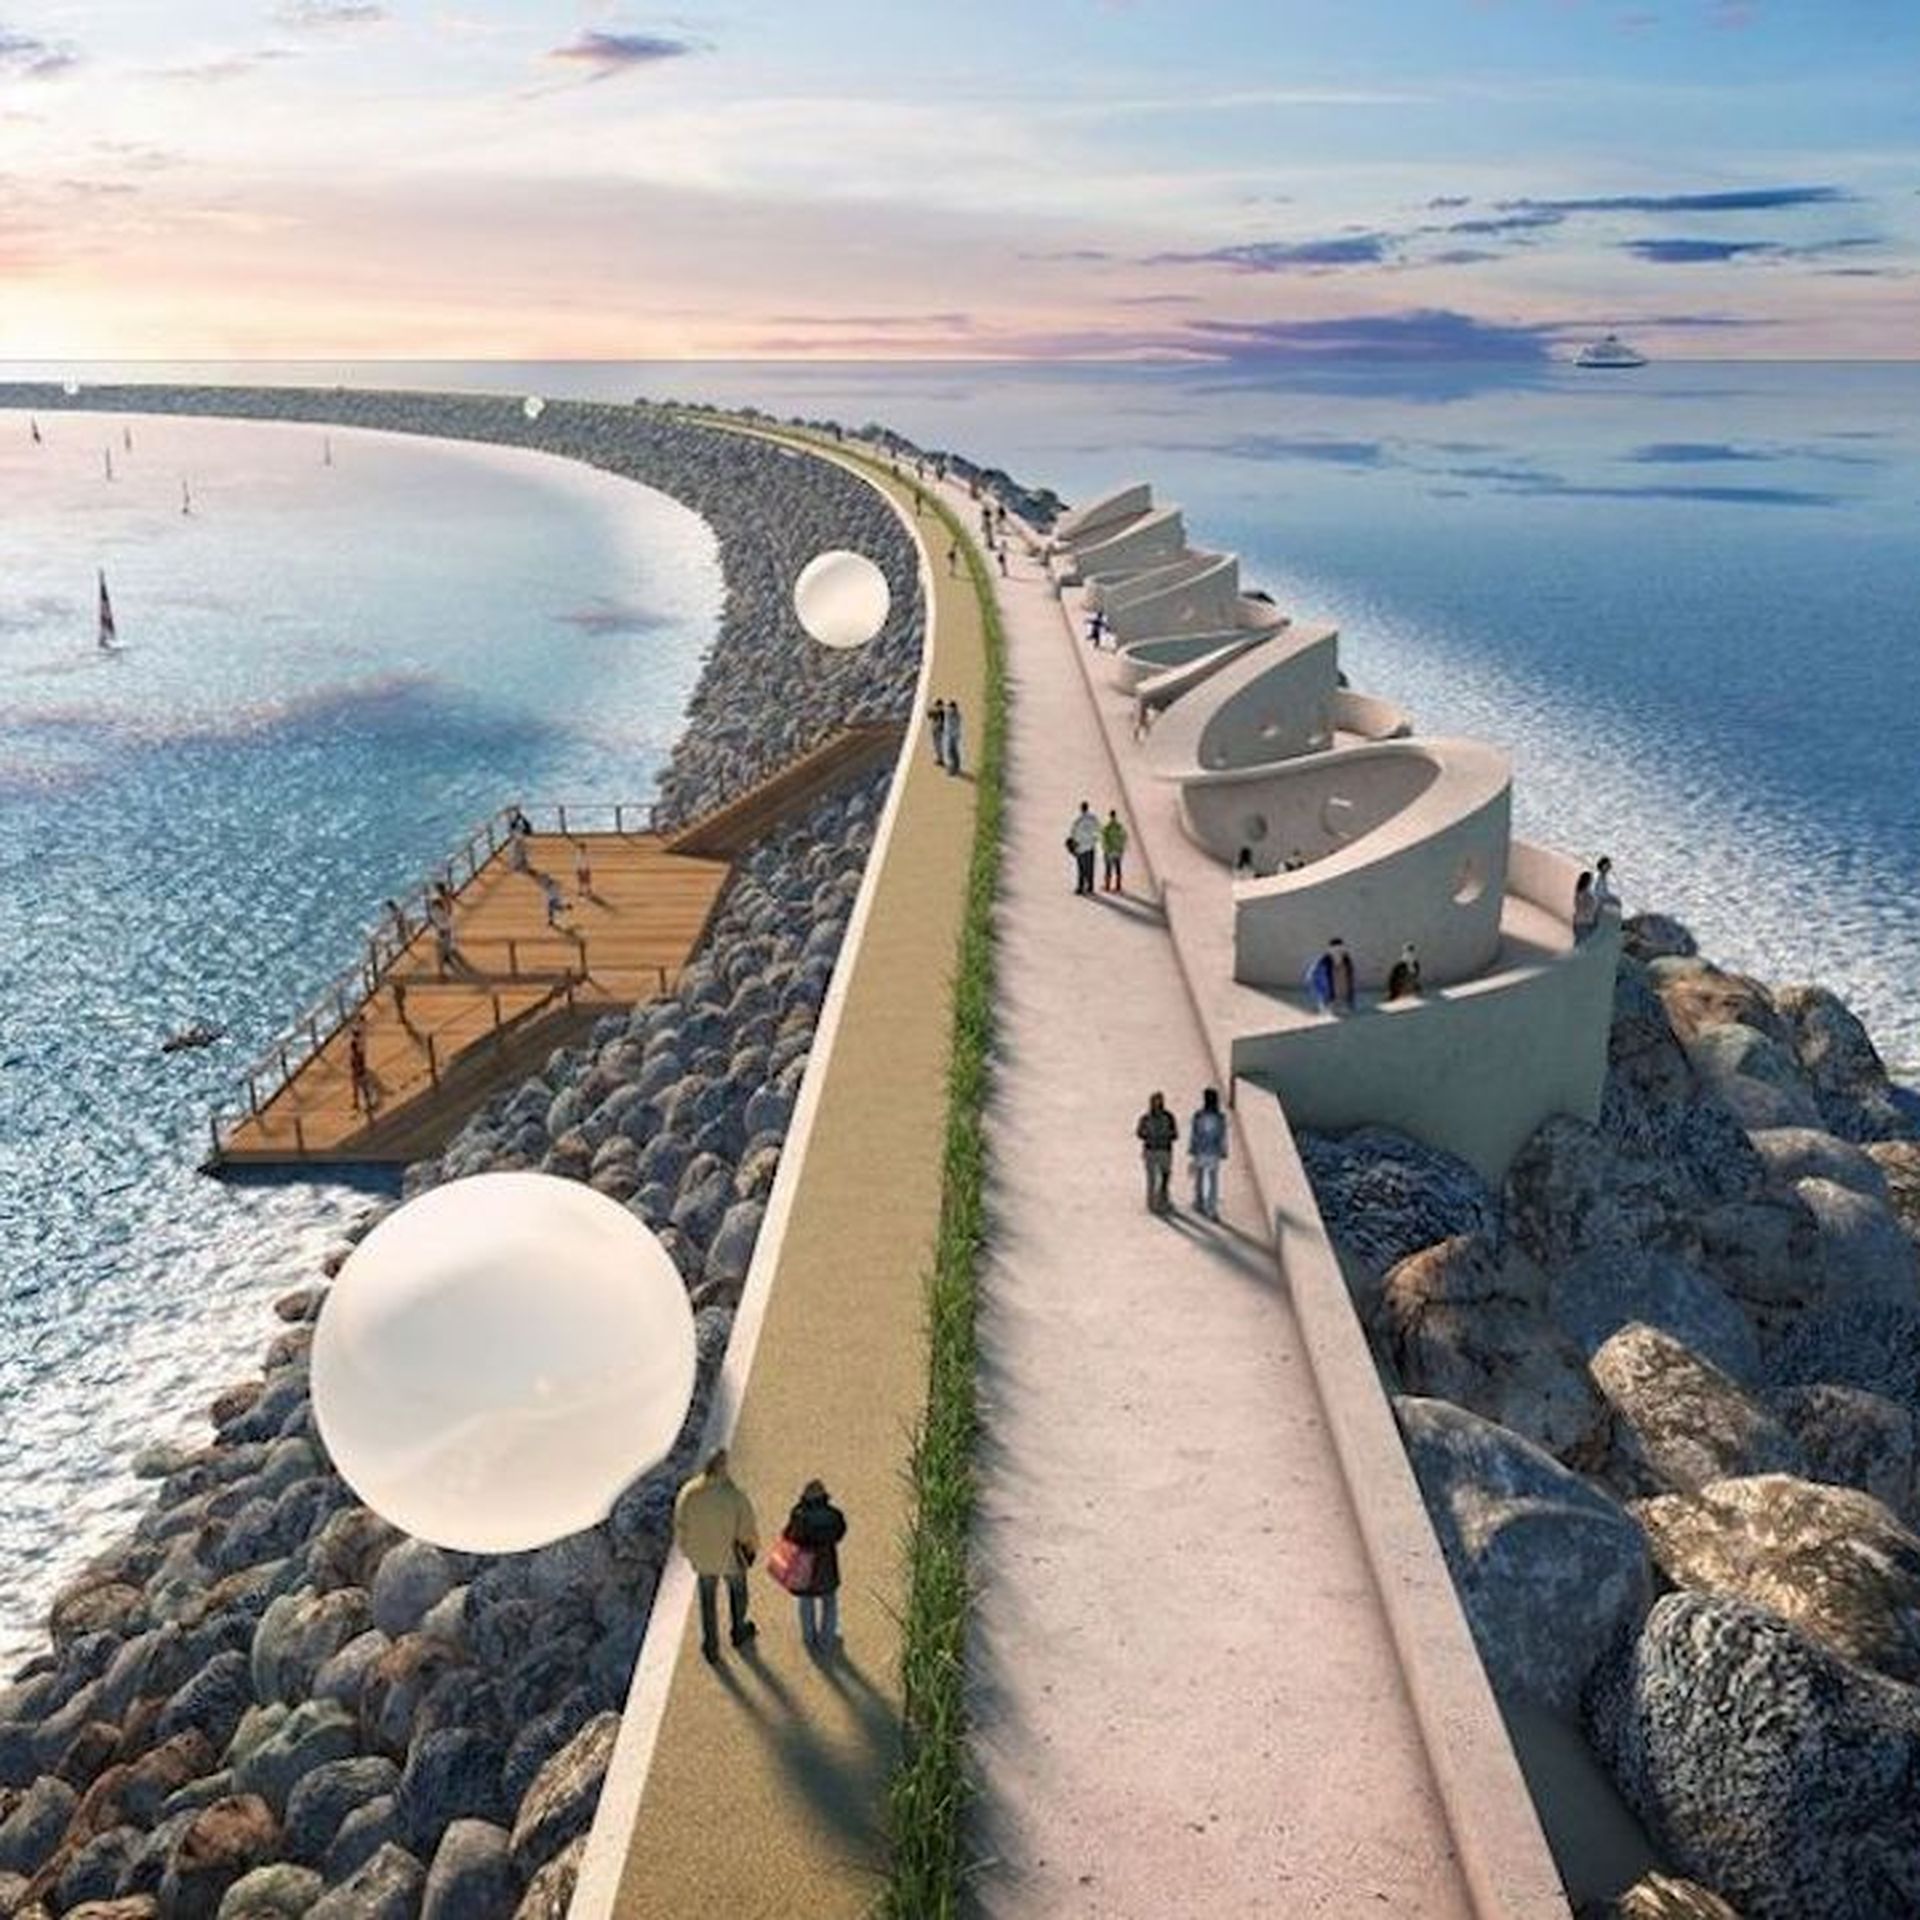 A rendering of the Swansea Tidal Lagoon project. Image: Tidal Lagoon Power via PA Wire